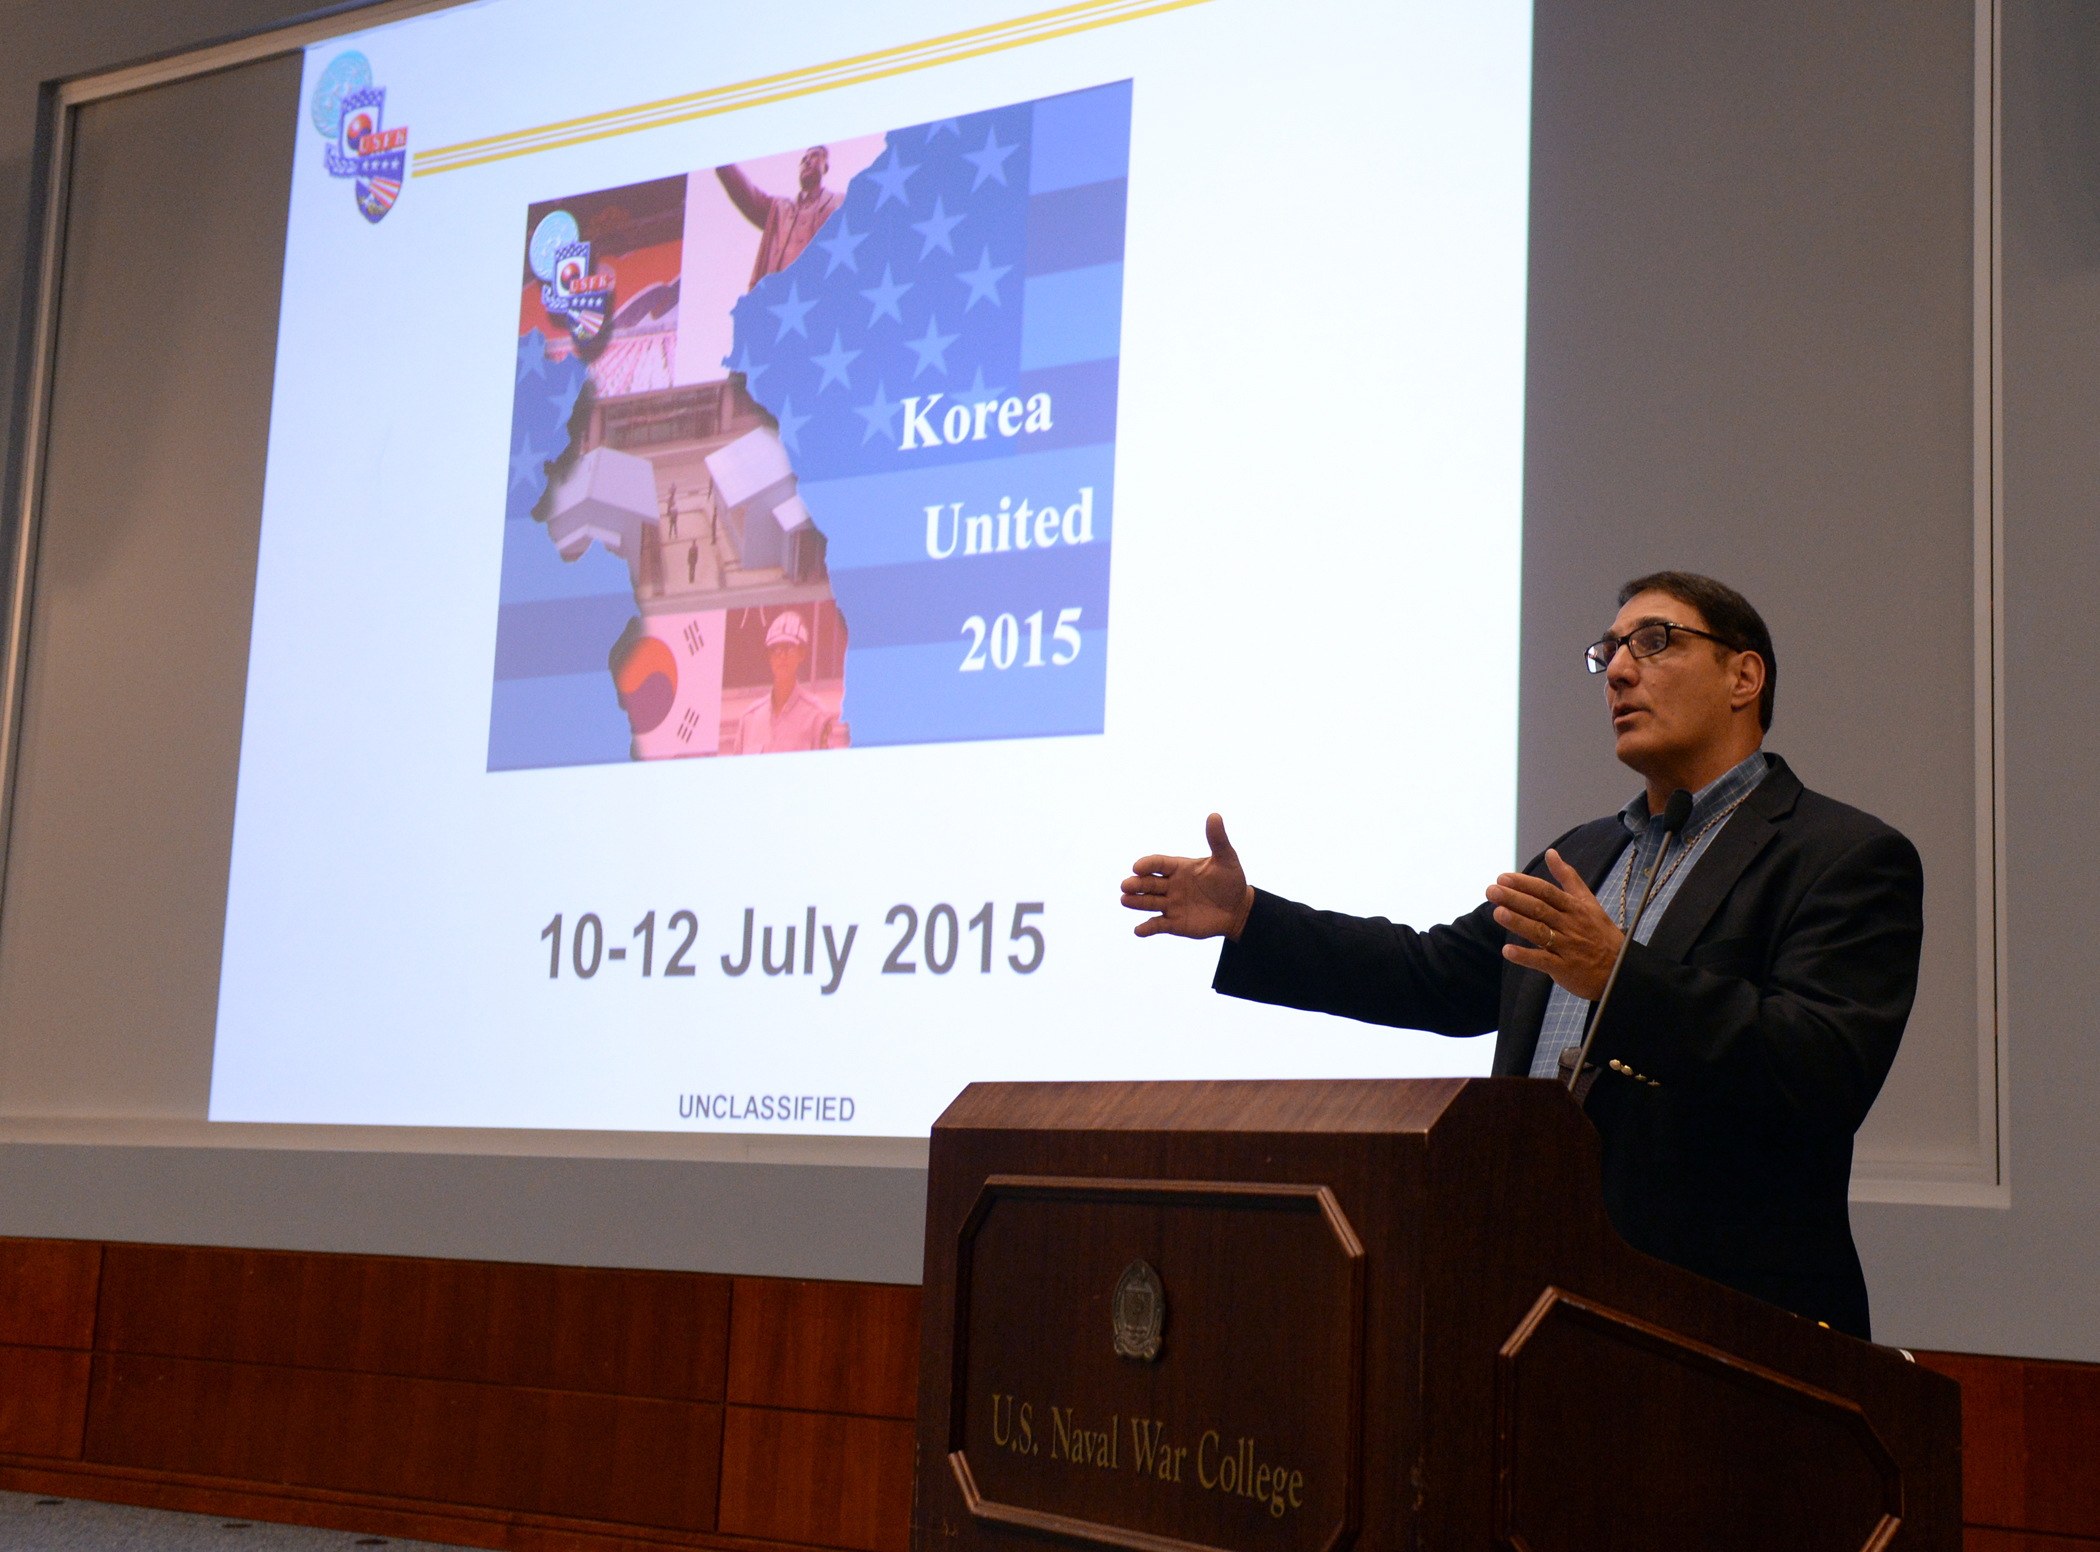 150710-N-PX557-049 NEWPORT, R.I. (July 10, 2015) Thomas Culora, dean, Center for Naval Warfare Studies at U.S. Naval War College (NWC), kicks off the Korea United (KU) 2015 War Game at NWC in Newport, Rhode Island. Sponsored annually by U.S. Forces Korea Detachment 102, this three-day operational, strategic-level event seeks to familiarize reserve, National Guard and active duty members with the command and control structure of Korea. (U.S. Navy photo by Chief Mass Communication Specialist James E. Foehl/Released)